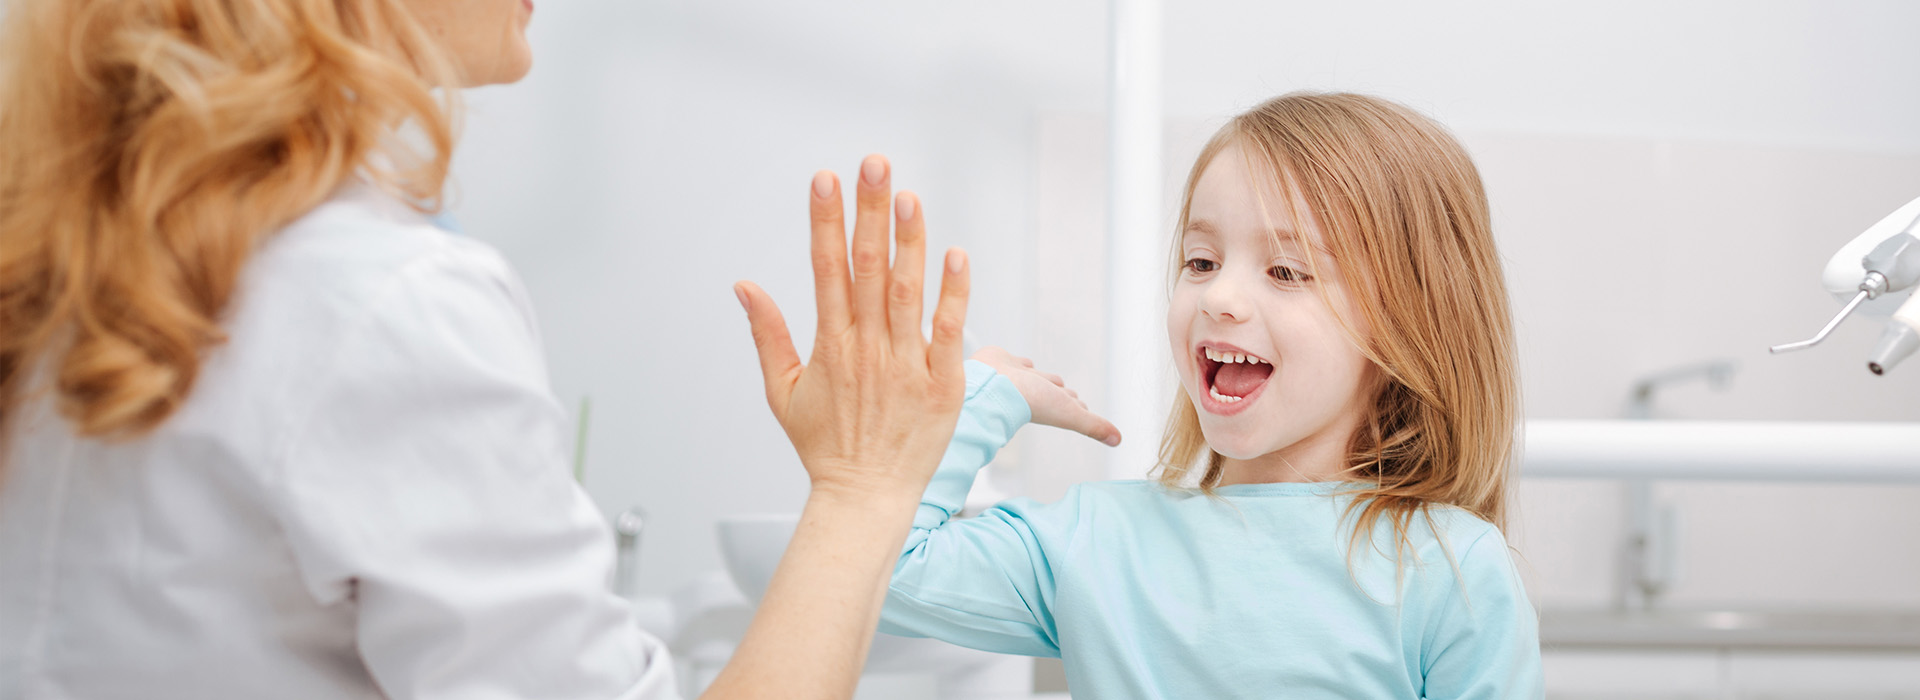 The image shows a woman and a young girl in a bathroom setting, with the woman reaching out to touch the child s face.